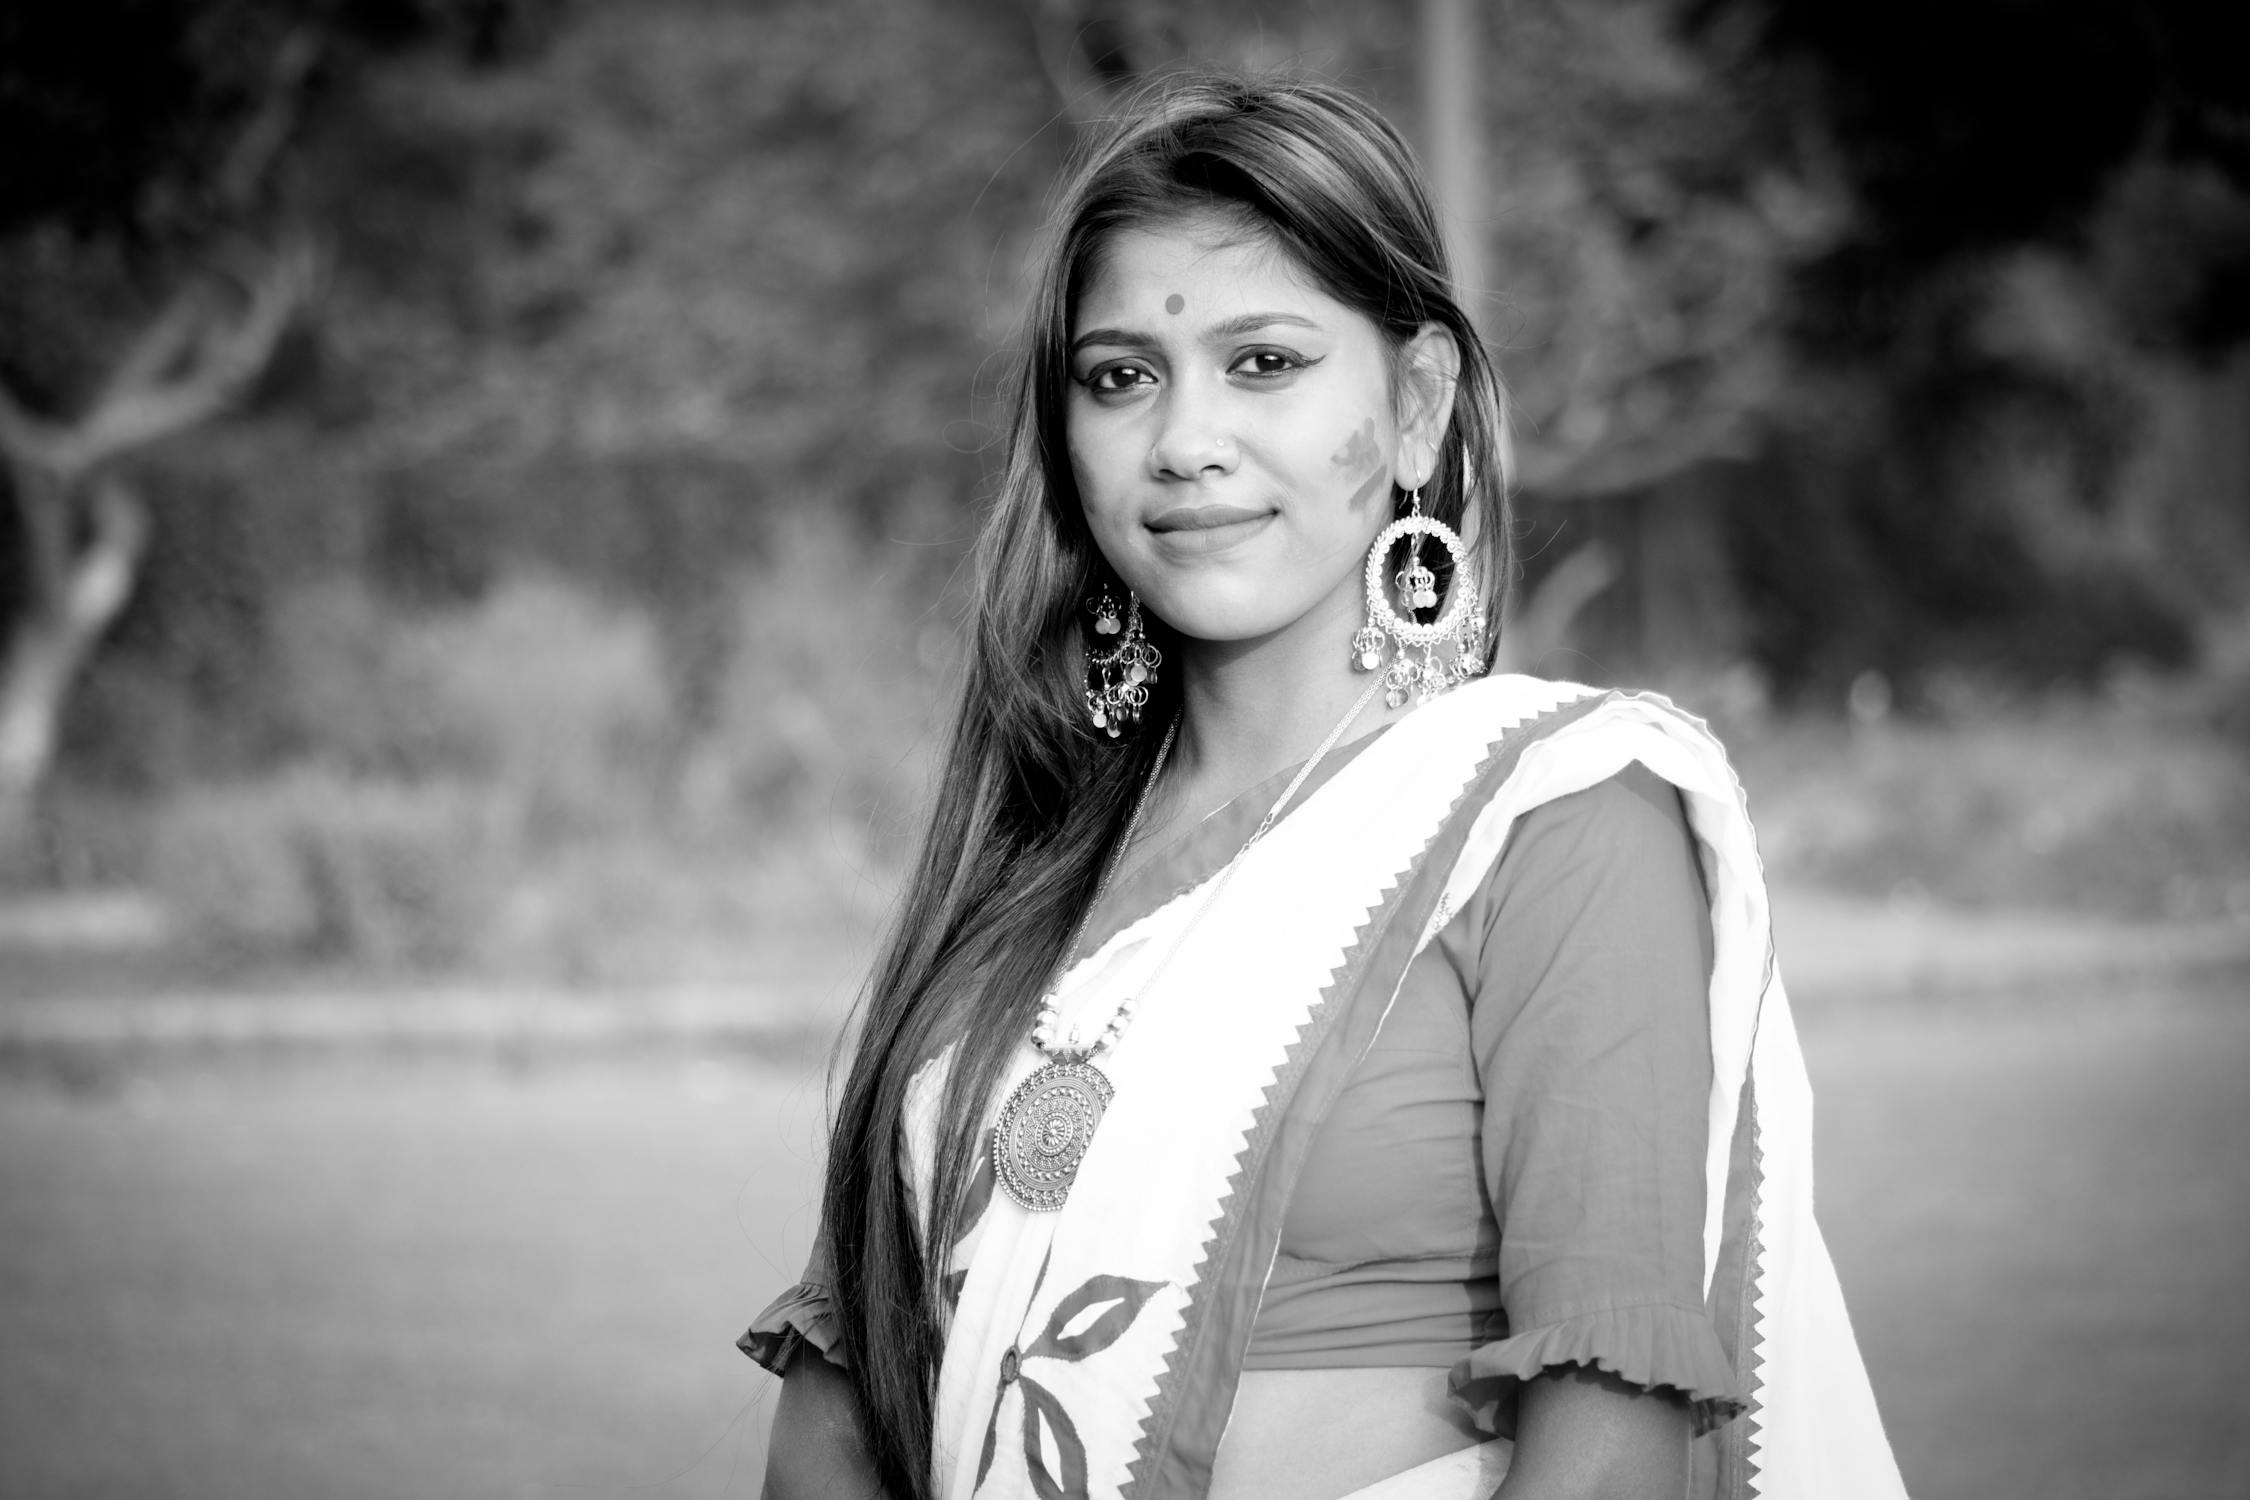 Saree @ Photo by Mir Rajjak from Pexels: https://www.pexels.com/photo/grayscale-photo-of-a-woman-in-saree-smiling-5872667/